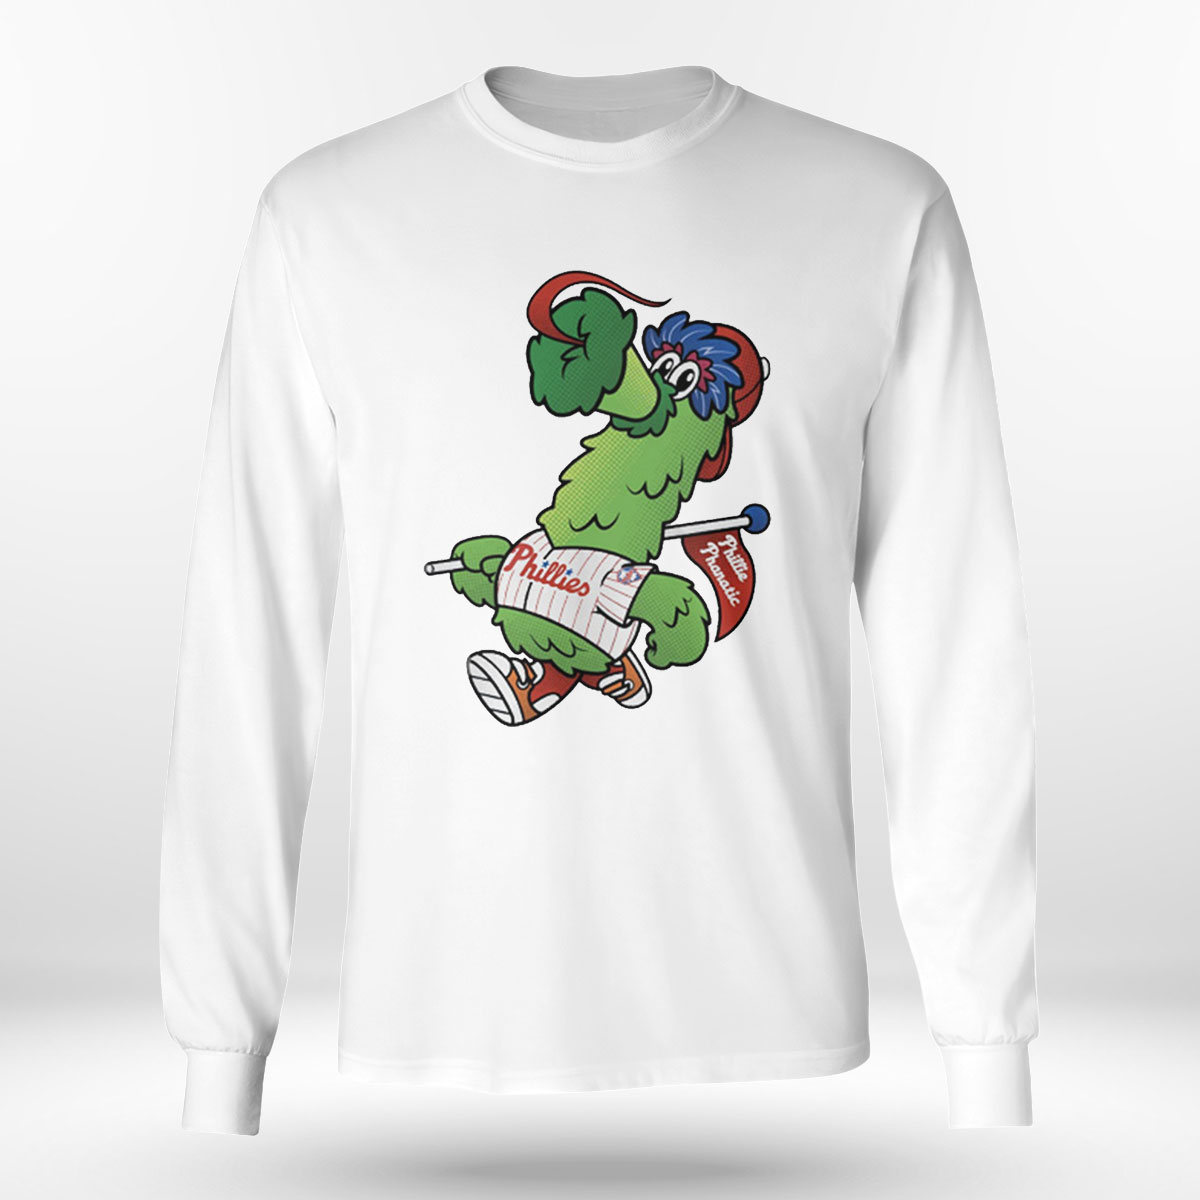 Dancing On Our Own Philly Phanatic, Phillies Baseball Shirt - Peanutstee